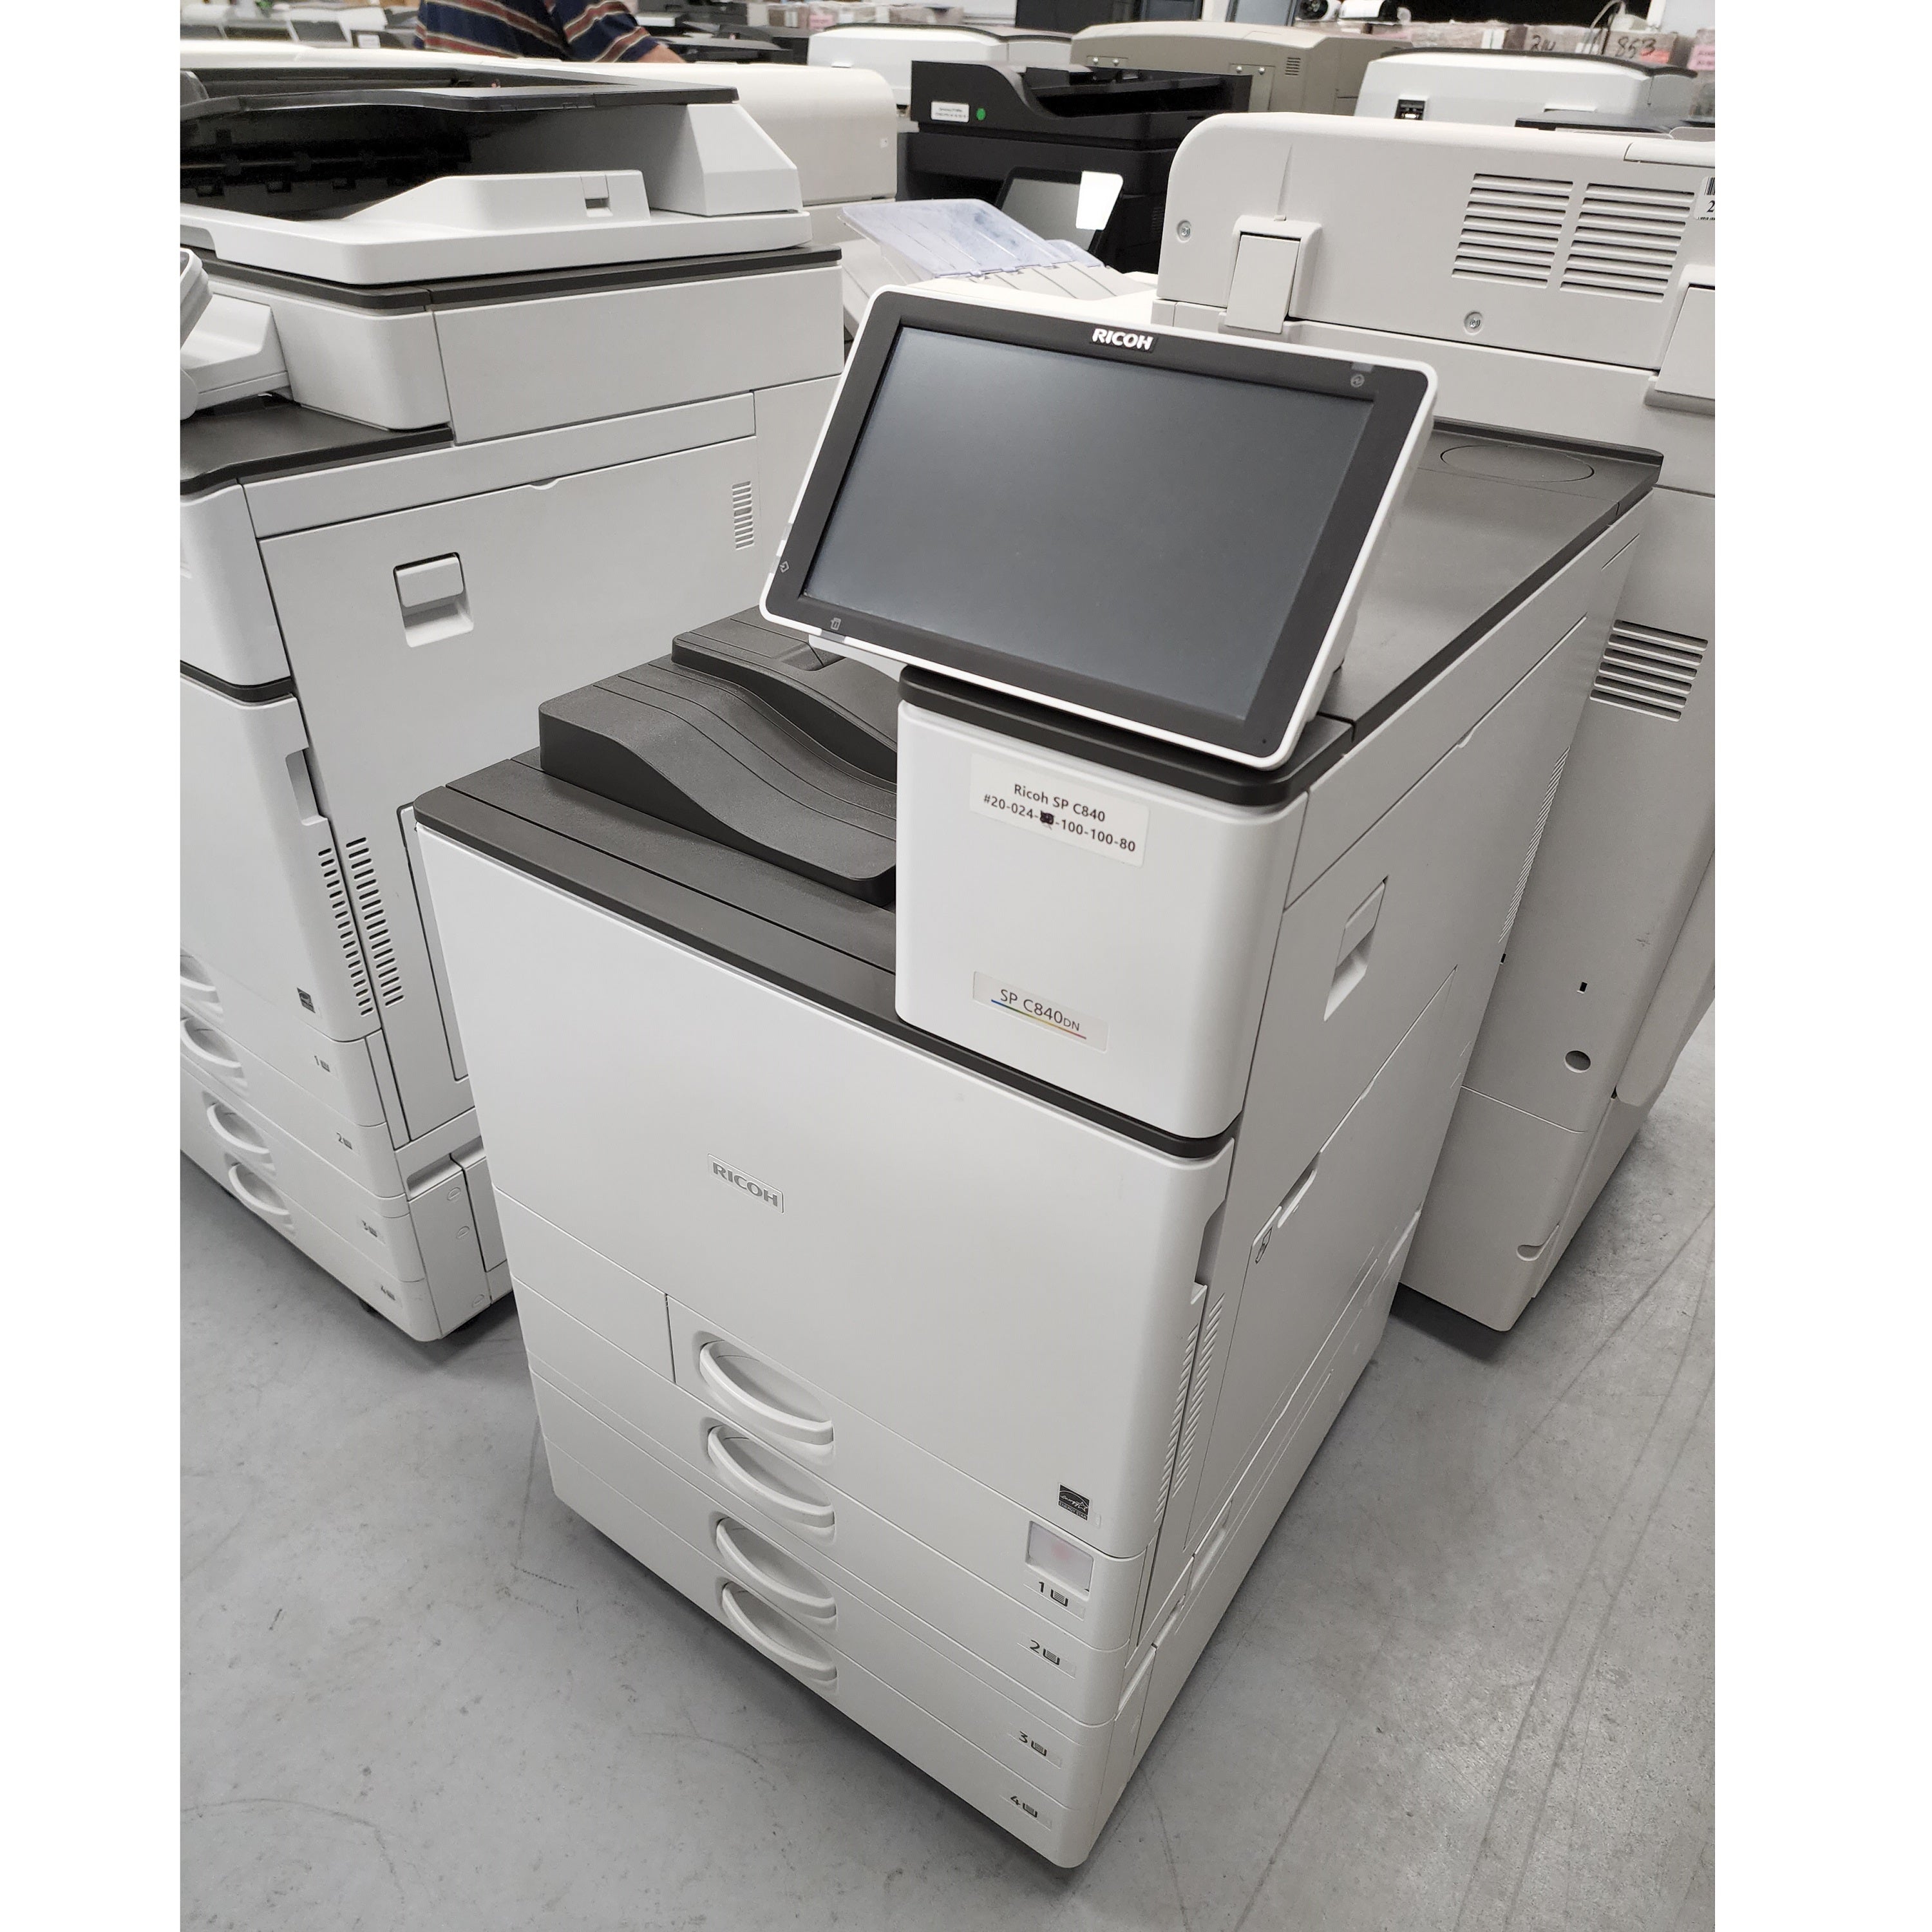 Absolute Toner $52/Month New Demo Ricoh SP C840DN C840 45PPM Office Color Laser Printer, 11x17 With 1200x1200 DPI Print Resolution - High-Quality Colour Output - Only 24 Pages Printed Showroom Color Copier